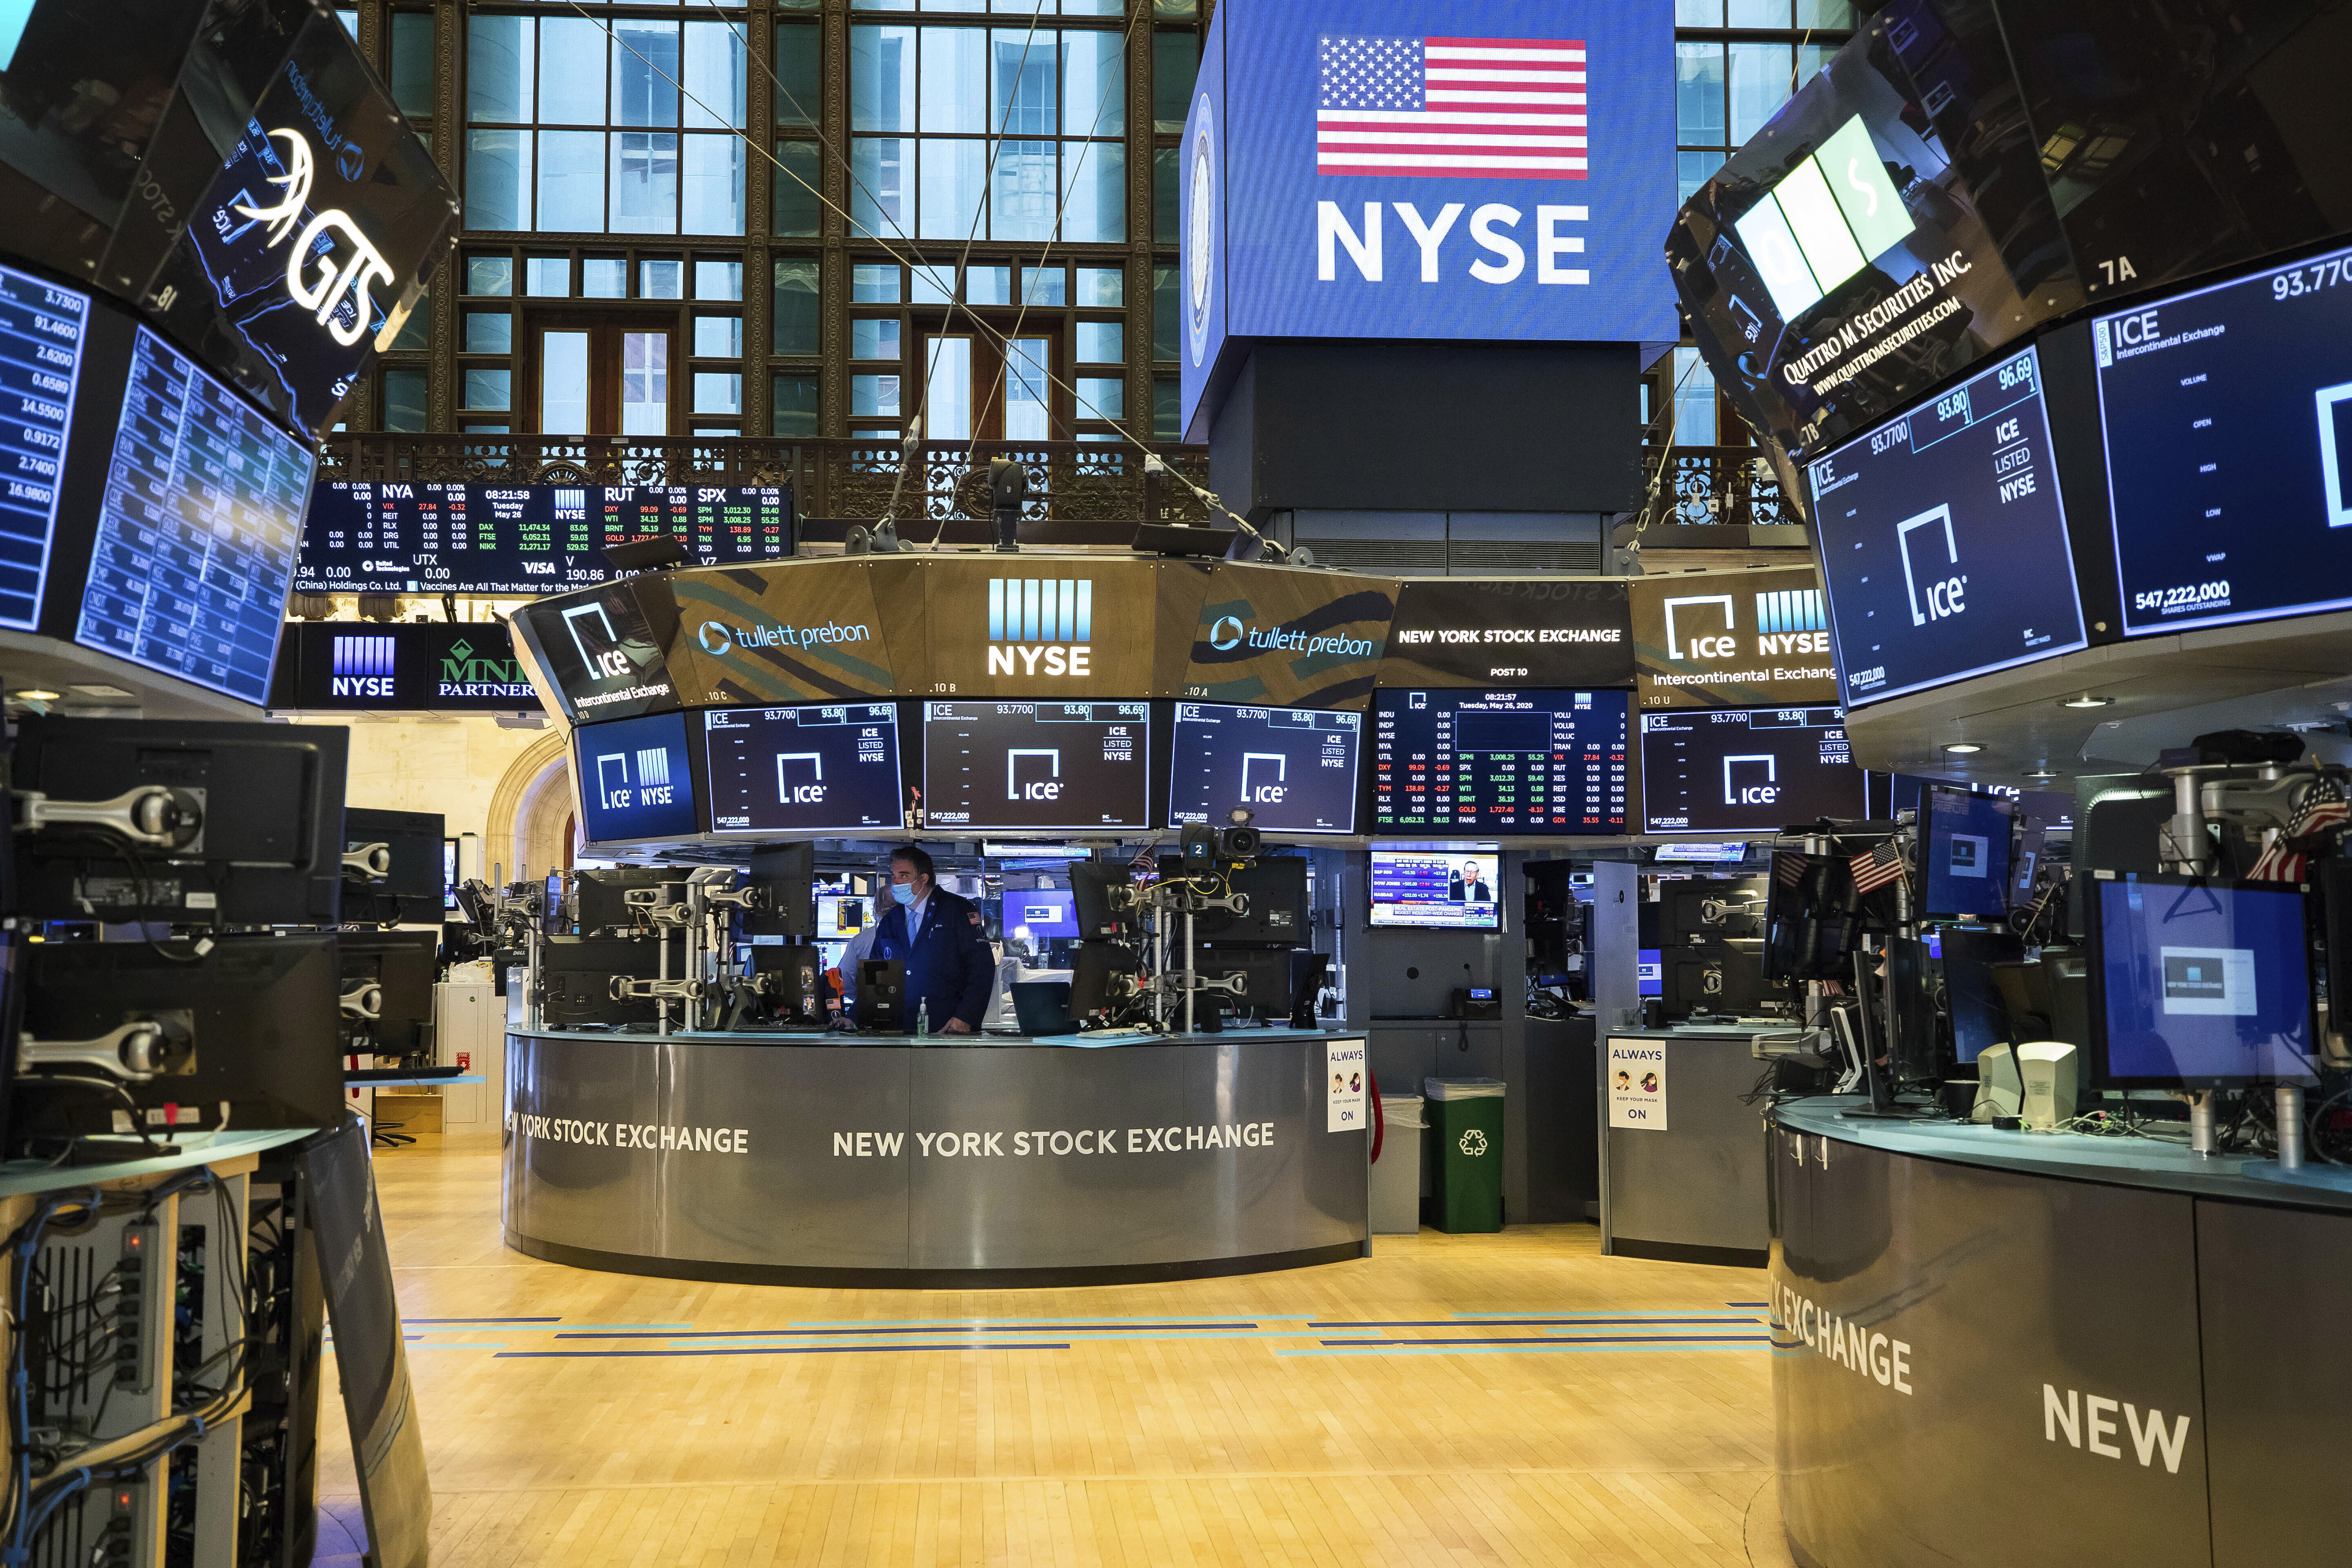 In this photo provided by the New York Stock Exchange, employees work on the partially reopened trading floor, Tuesday, May 26, 2020. Stocks surged on Wall Street in afternoon trading Tuesday, driving the S&P 500 to its highest level in nearly three months, as hopes for economic recovery overshadow worries about the coronavirus pandemic. (Courtney Crow/New York Stock Exchange via AP)